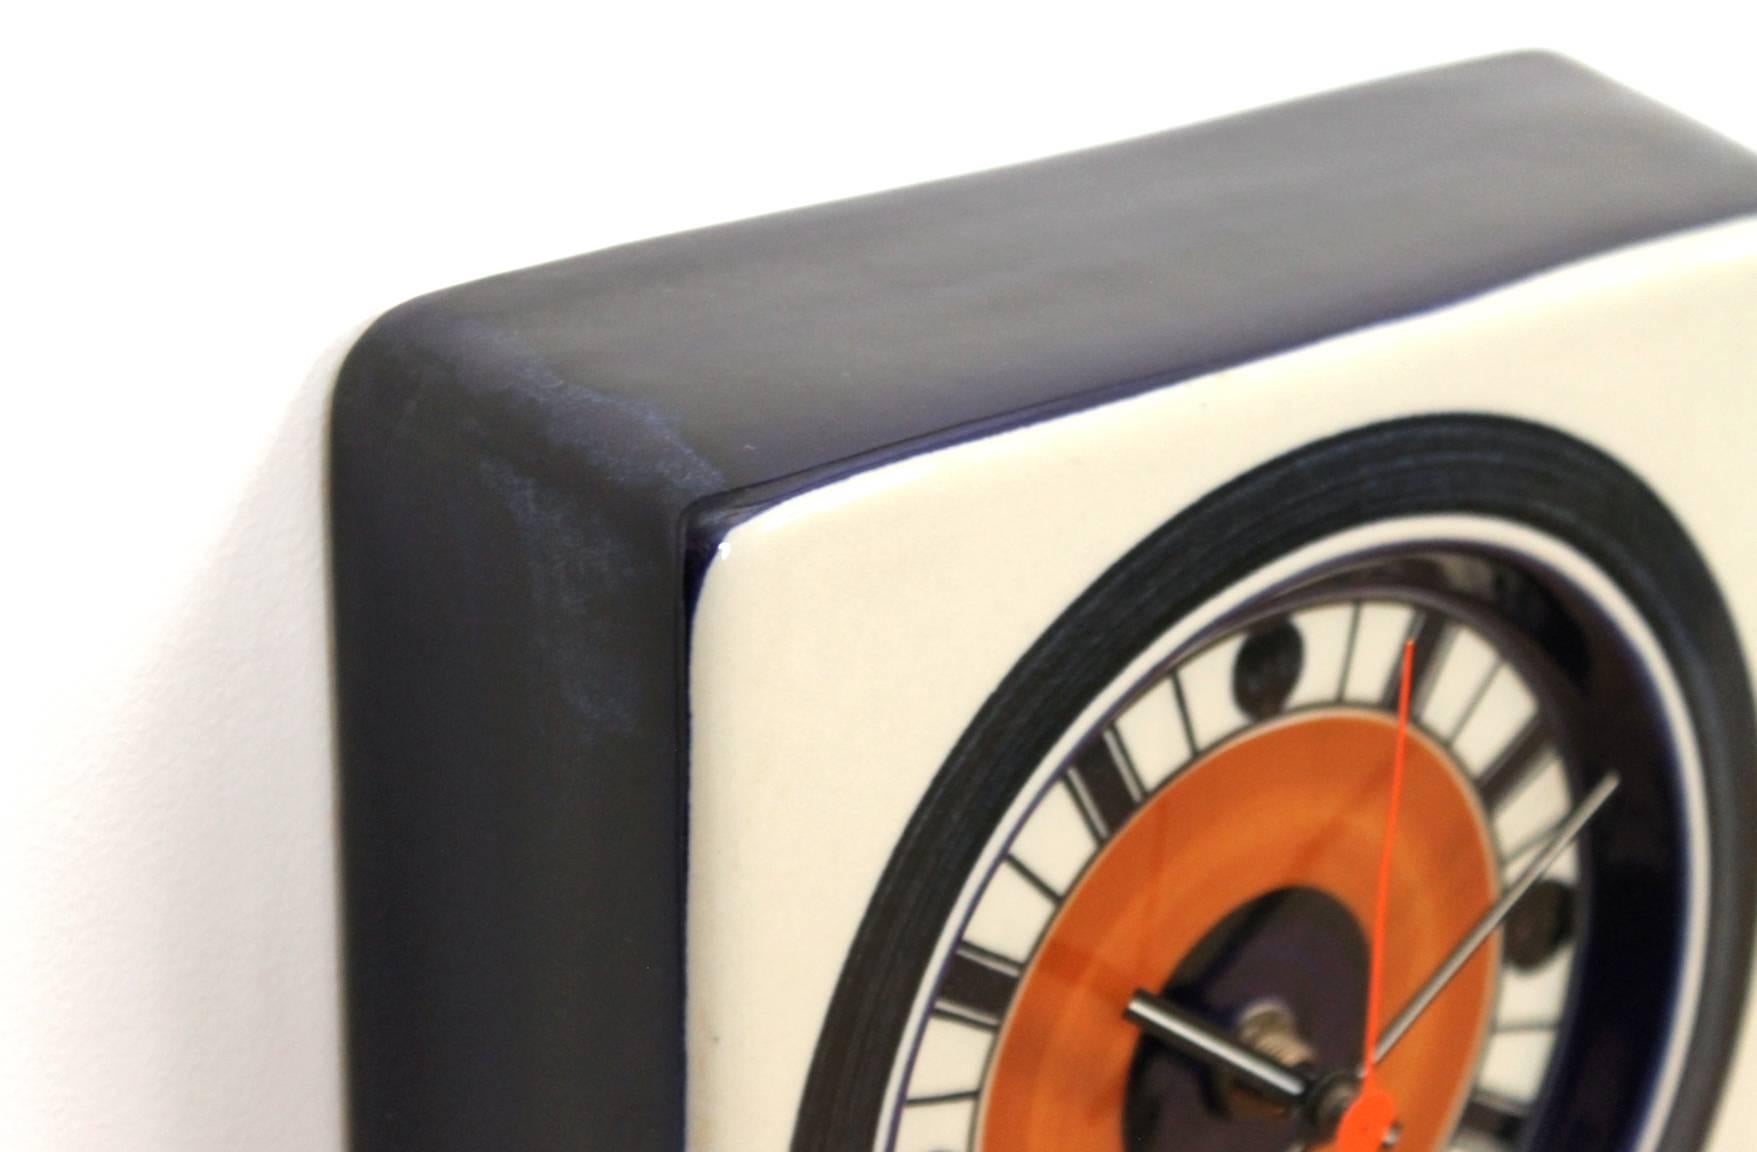 Mid-20th Century Rorstrand Ceramic Clock Designed by Marianne Westman